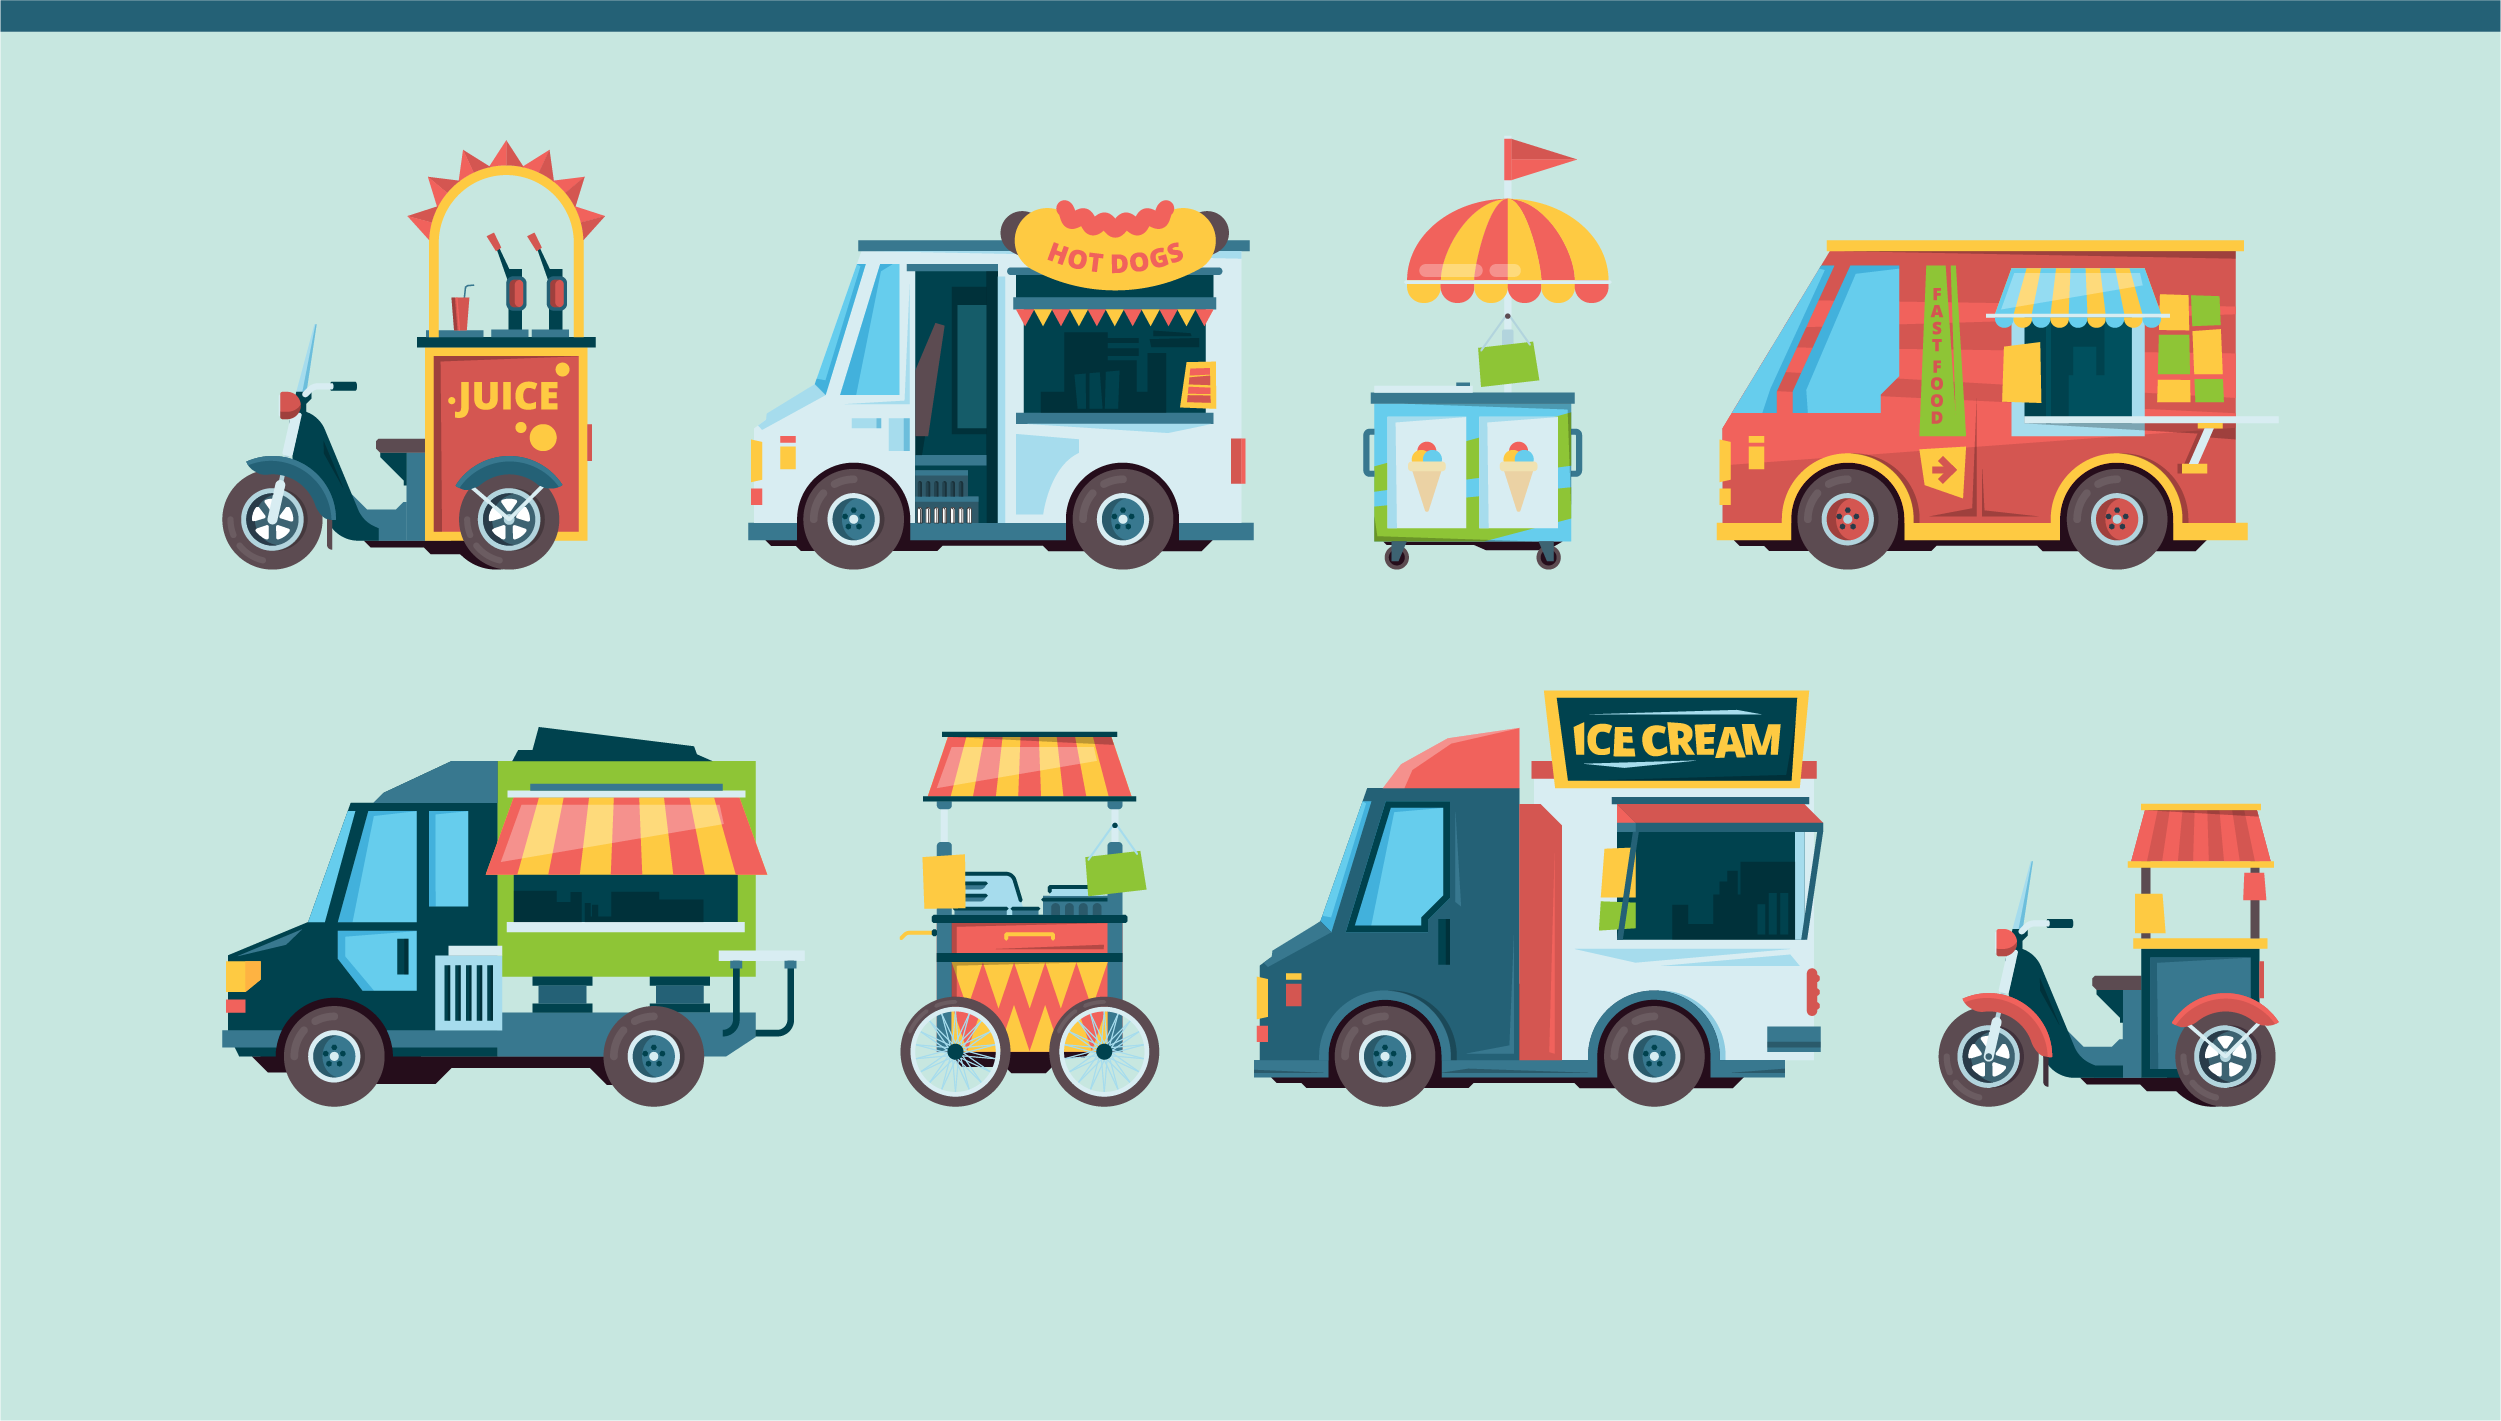 Cartoon picture showing different types of Mobile Food Units, such as food trucks, push carts, and bike carts.